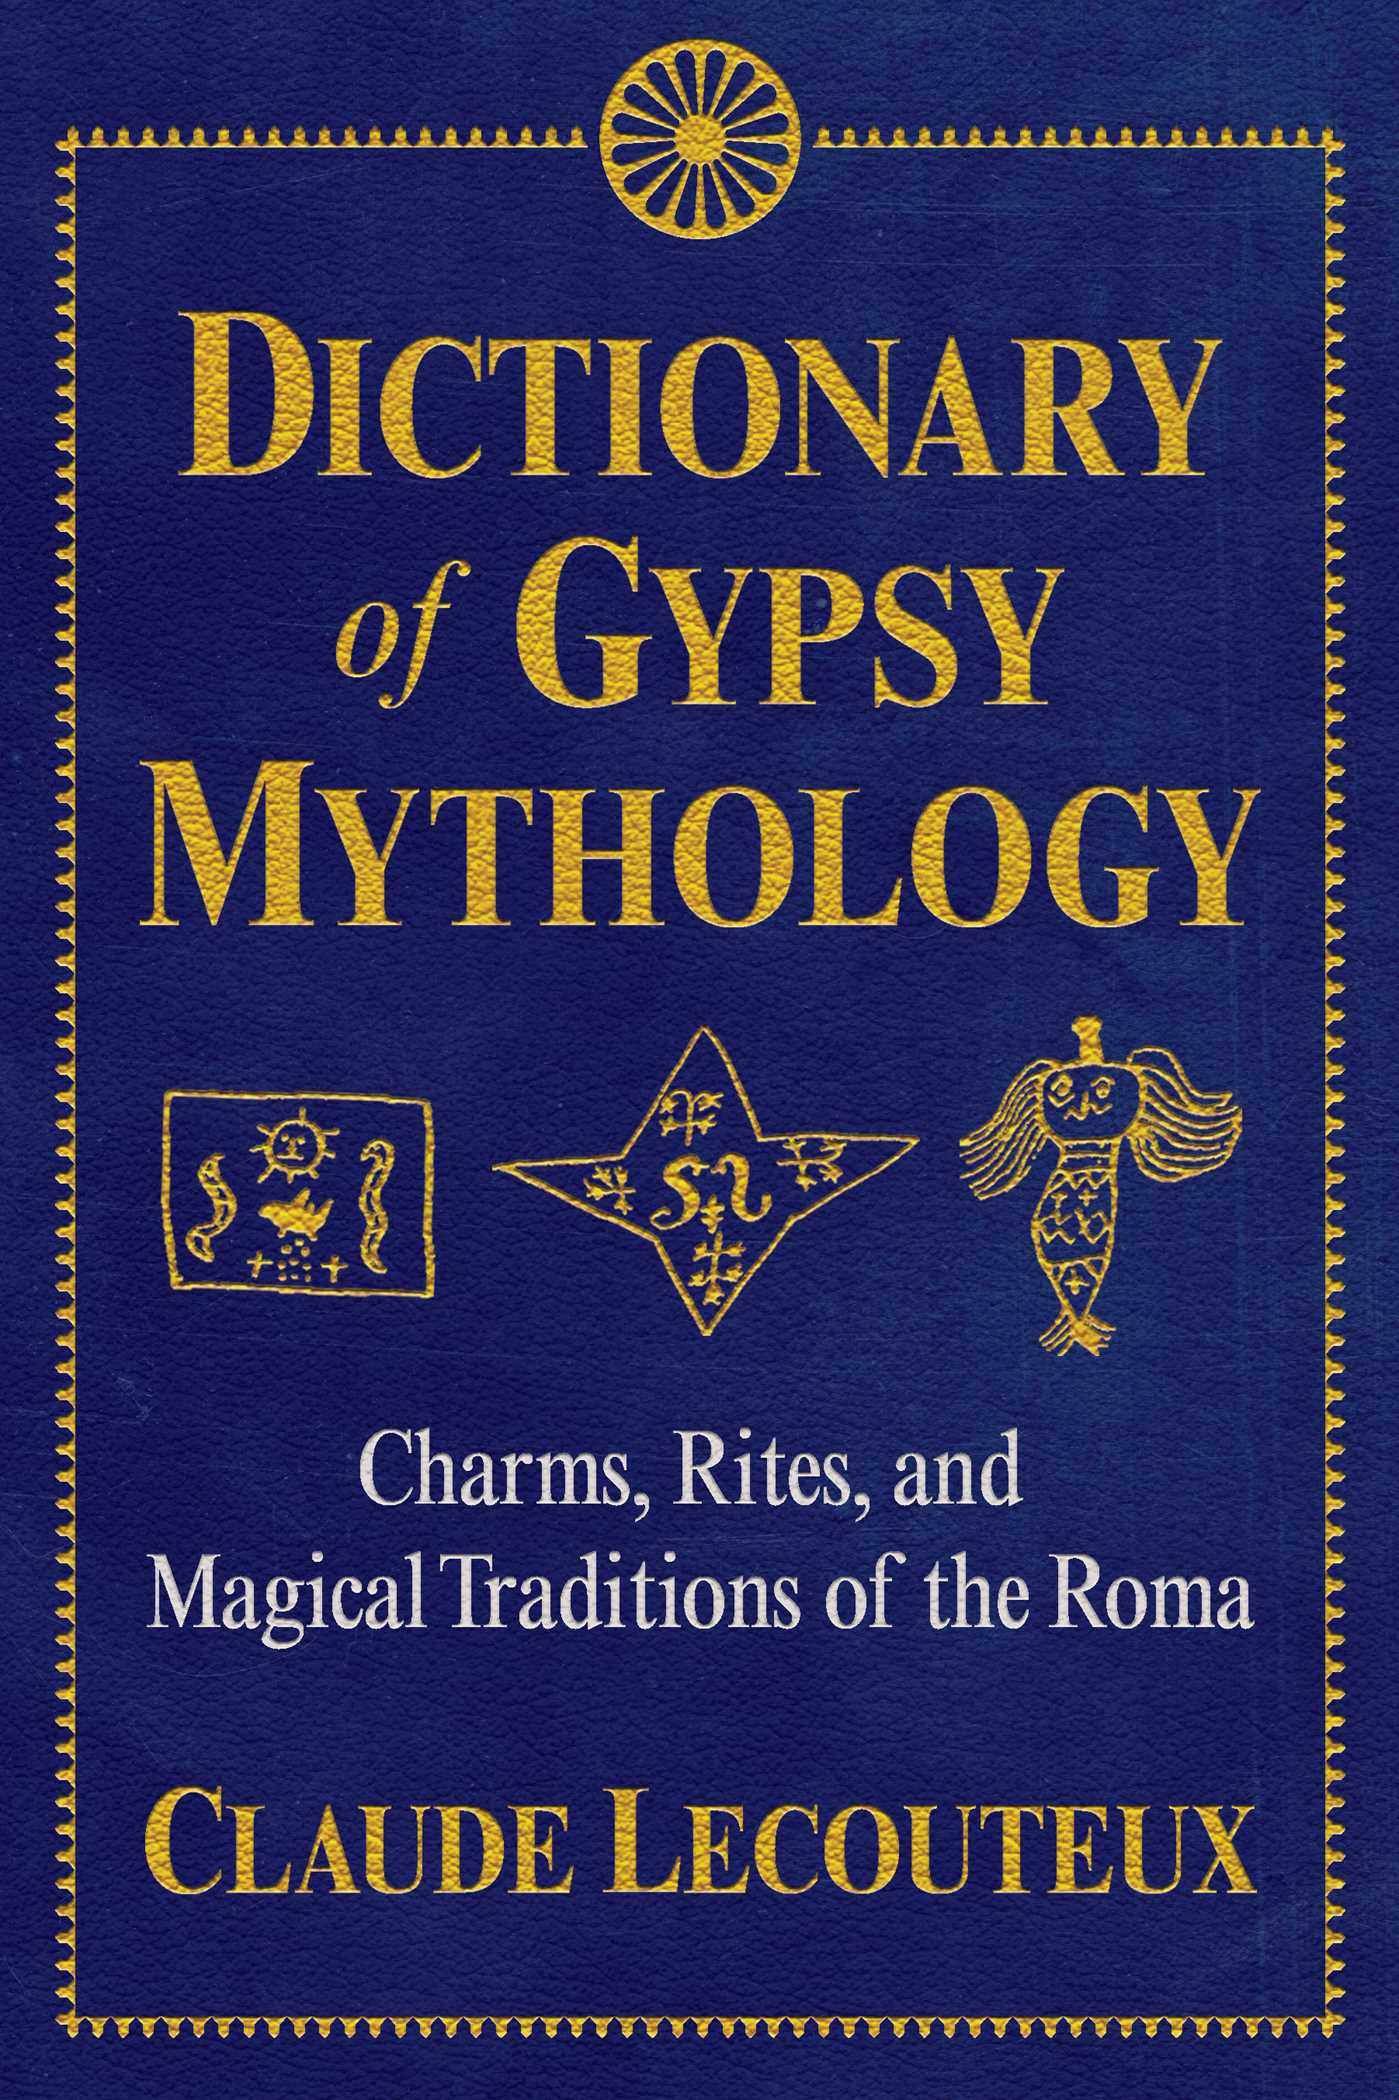 Dictionary of Gypsy Mythology ~ Claude Lecouteux